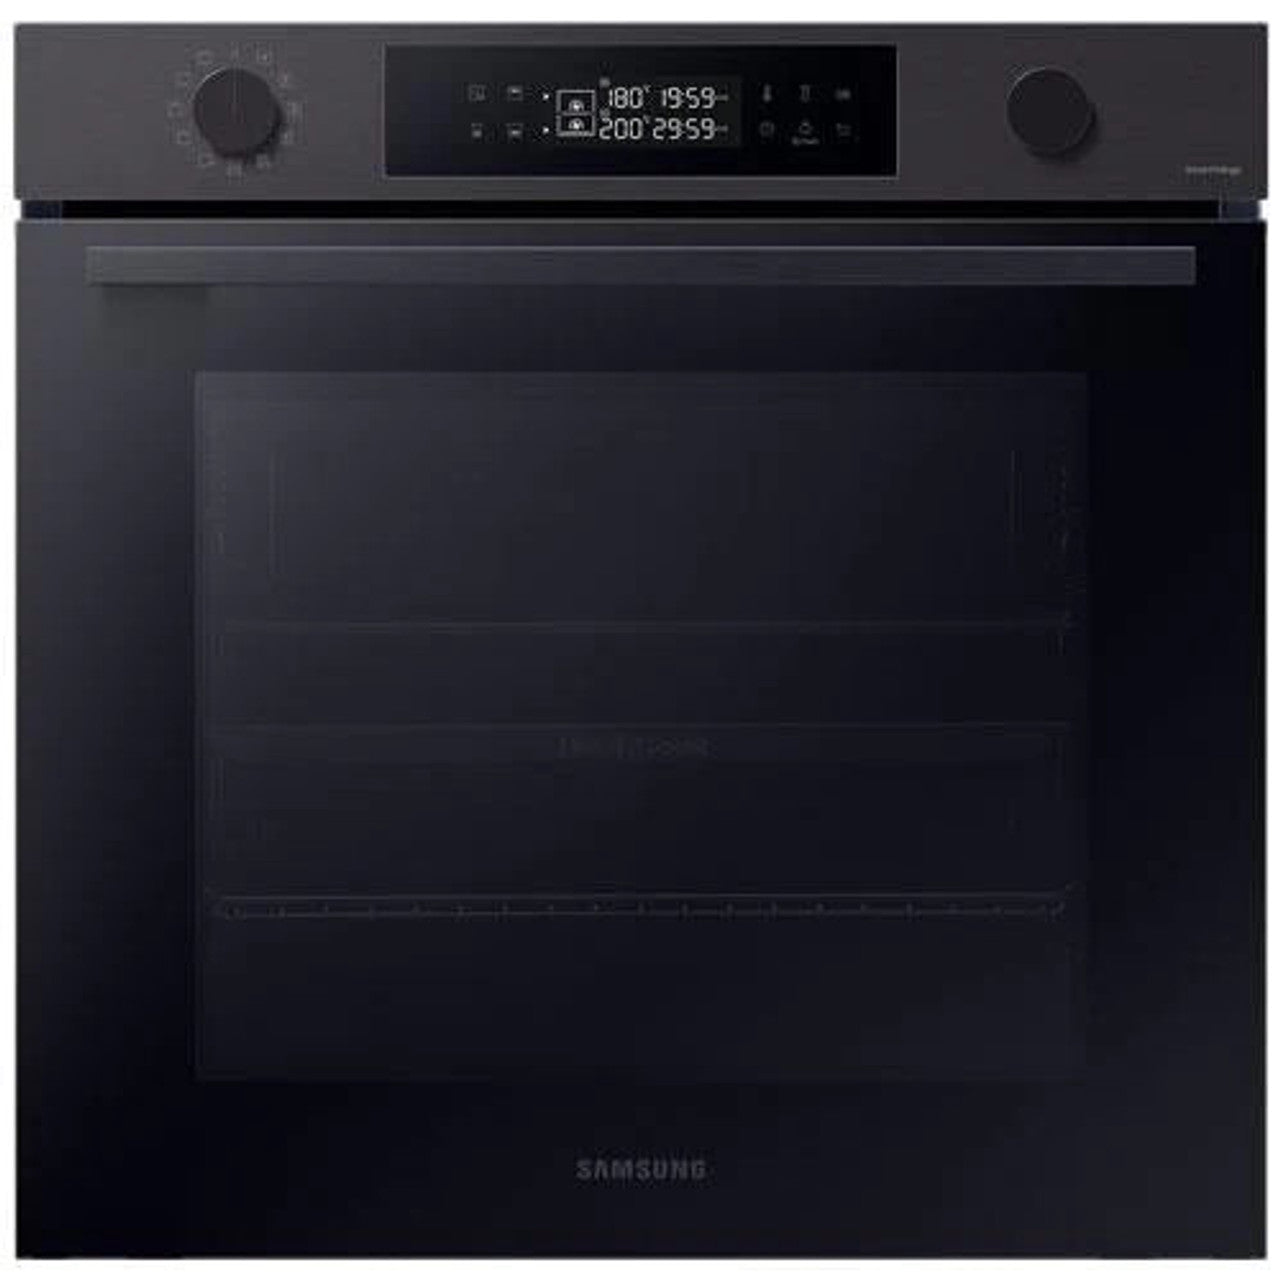 Samsung Series 4 Pyro Single Oven Black Stainless